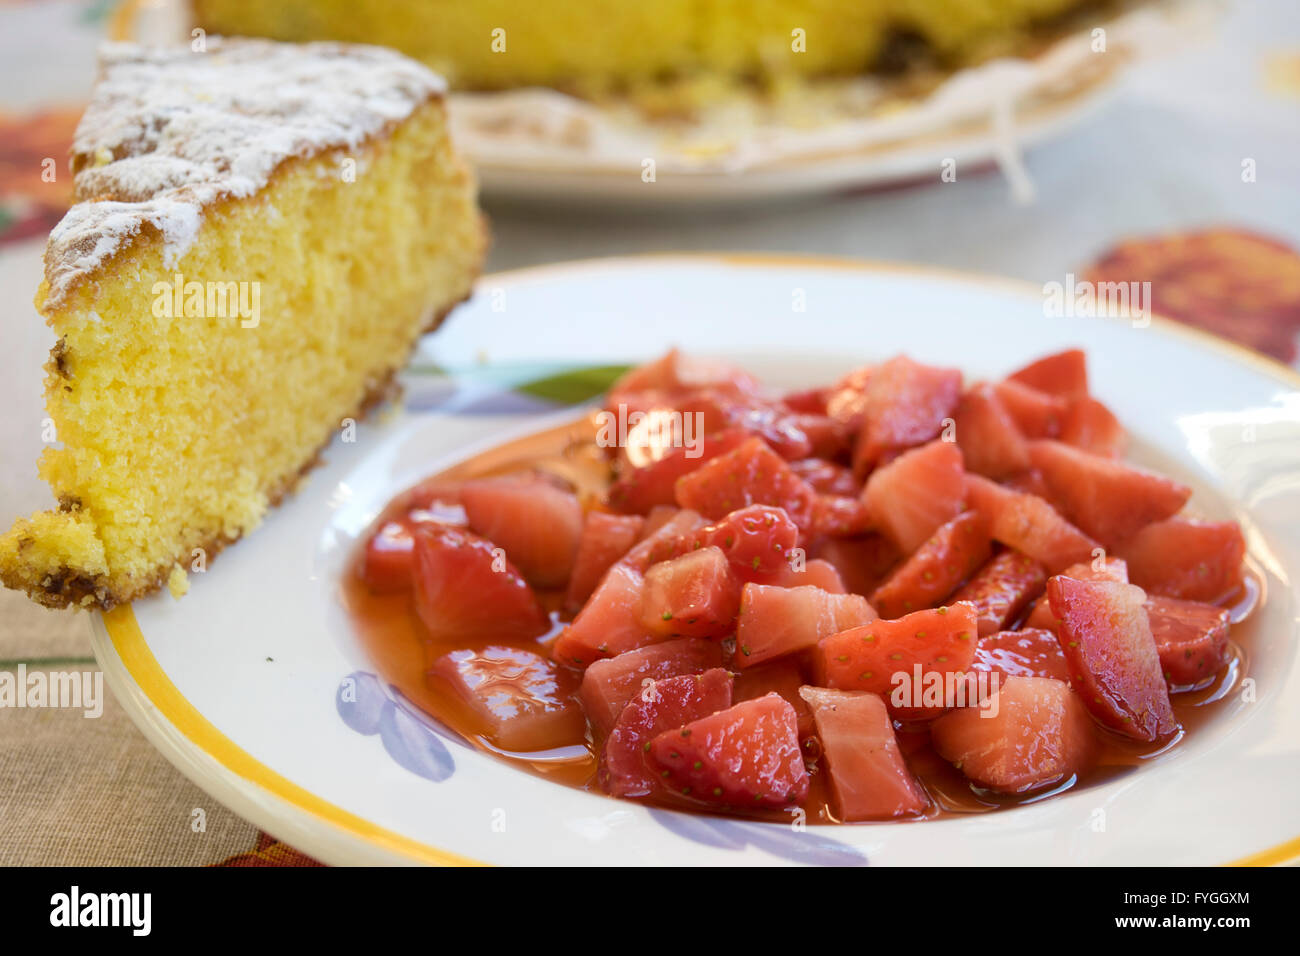 chopped strawberries in a dish with a slice of sponge cake Stock Photo